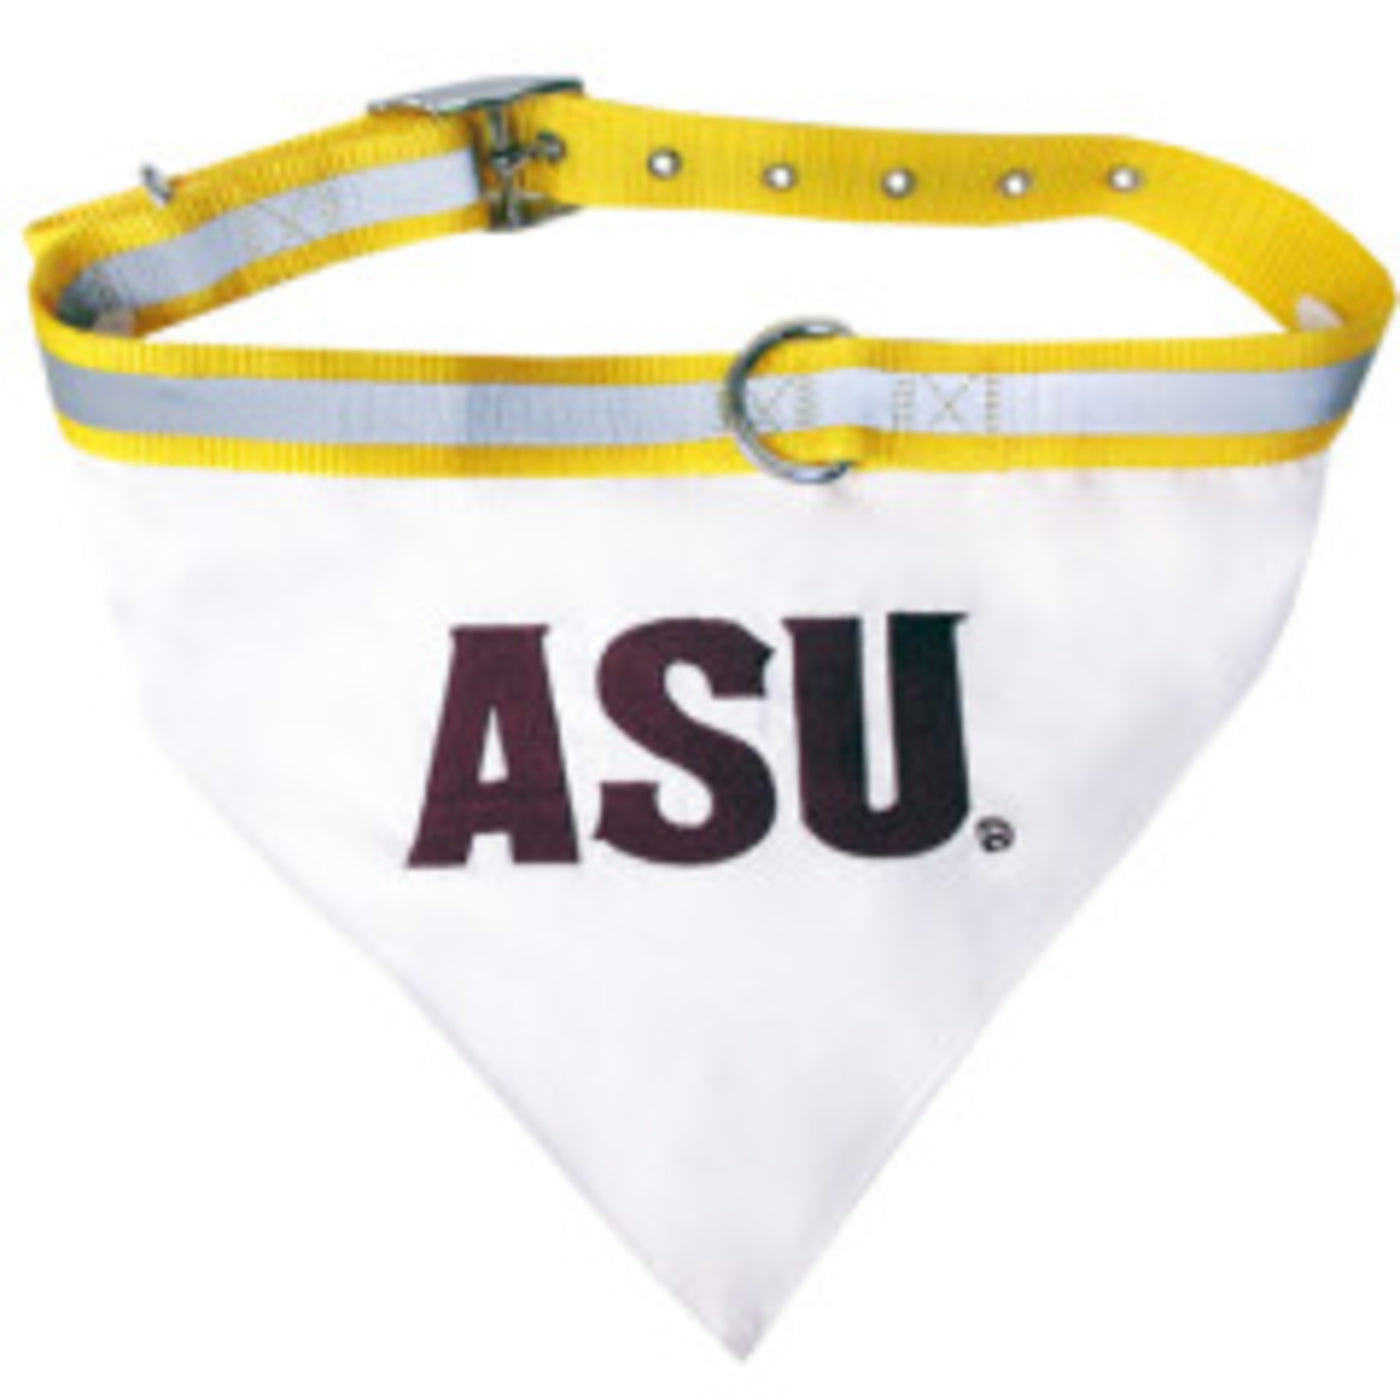 ASU gold dog collar with reflective stripe with white bandana with 'ASU' lettering